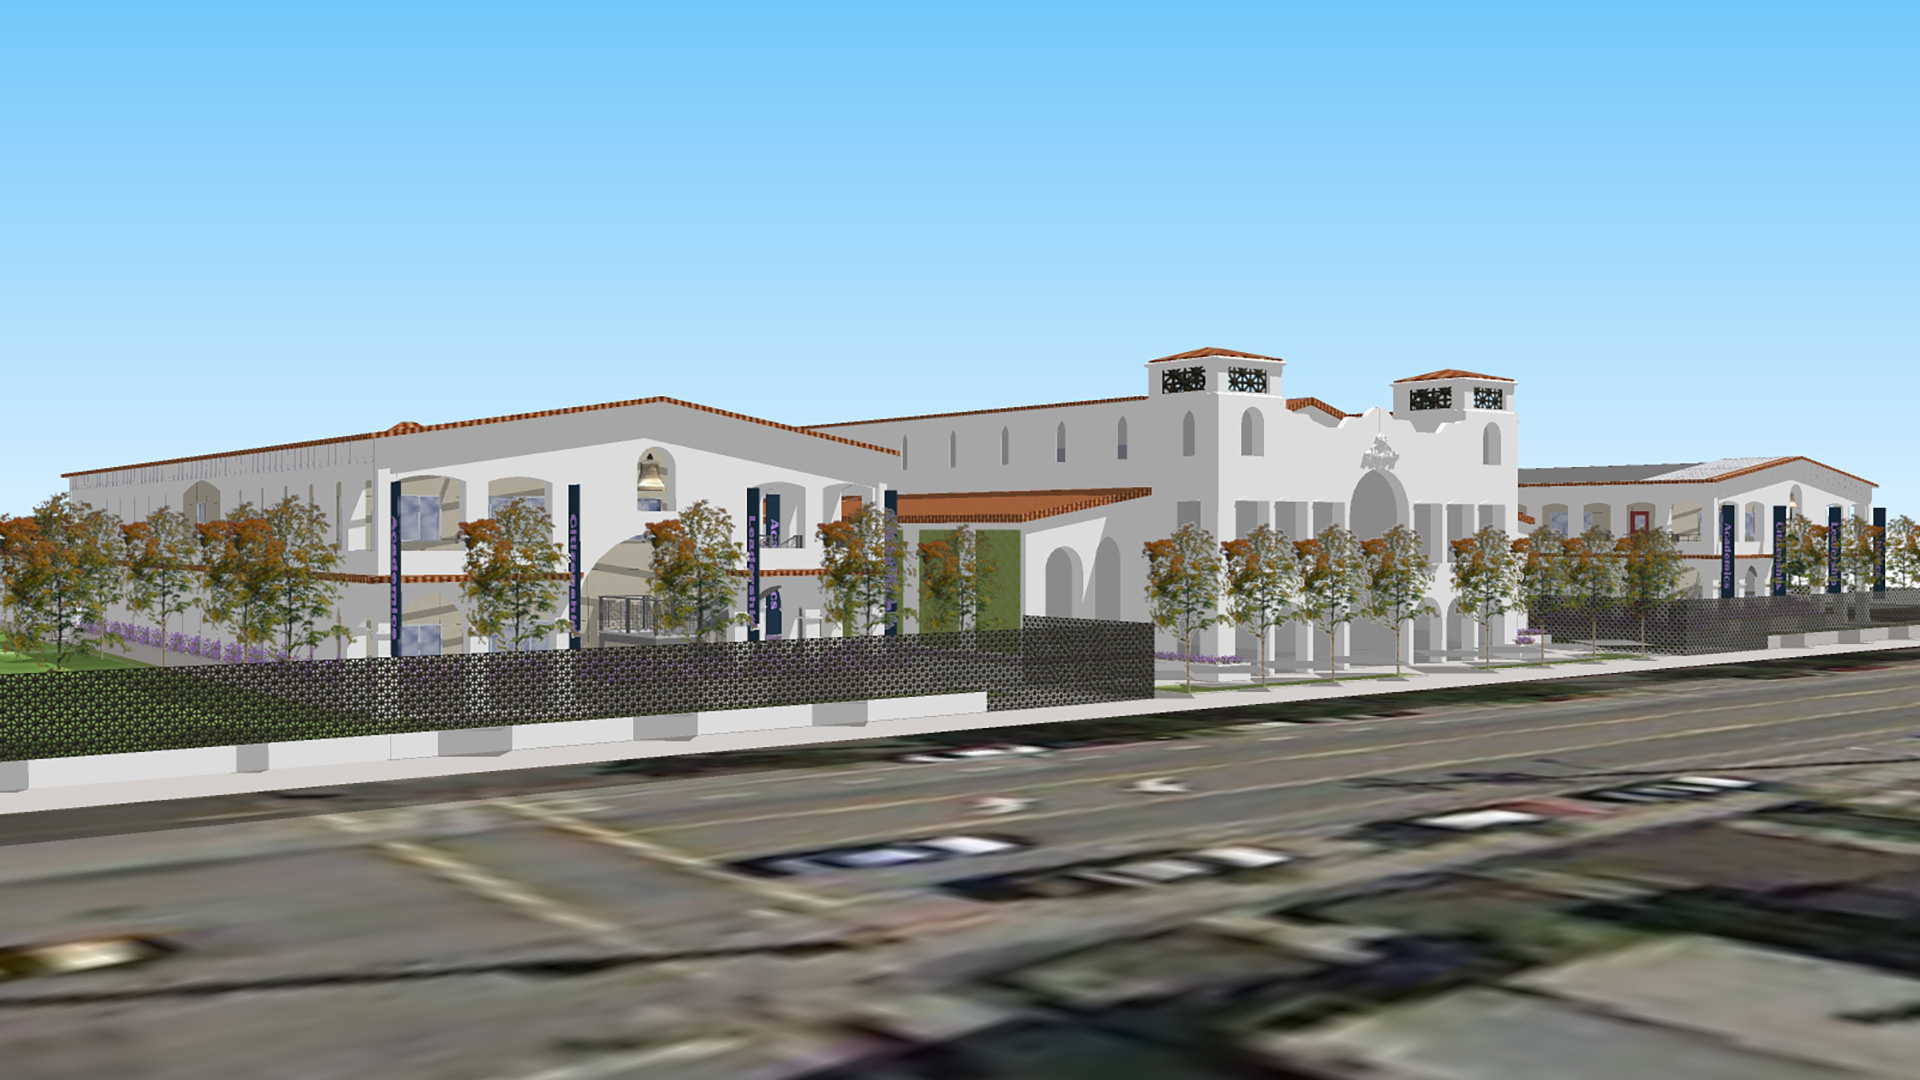 Rendering of campus with architecture inspired by california missions.